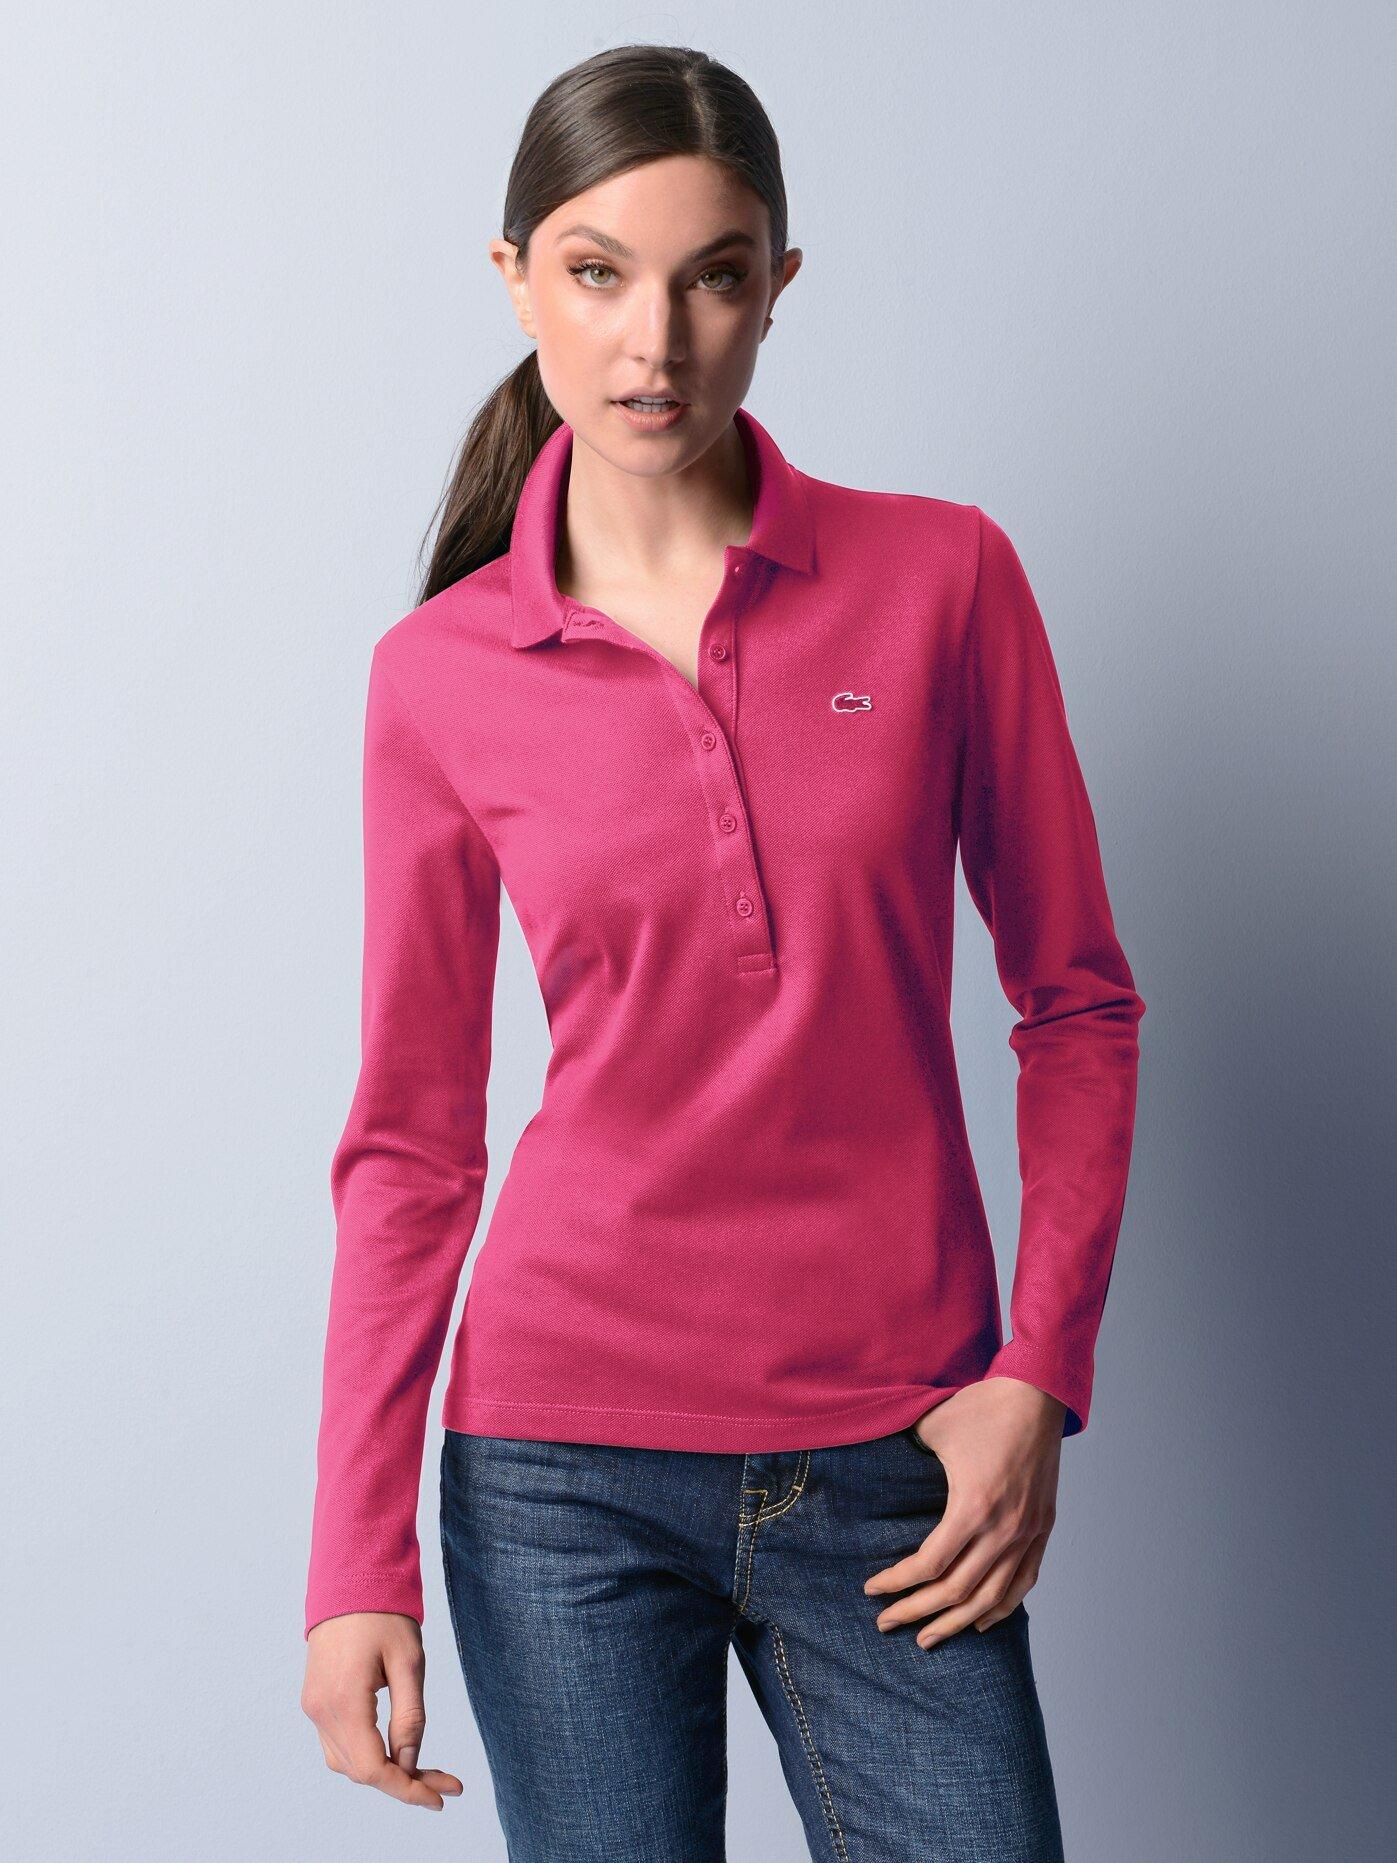 lacoste long sleeve polo shirts for women